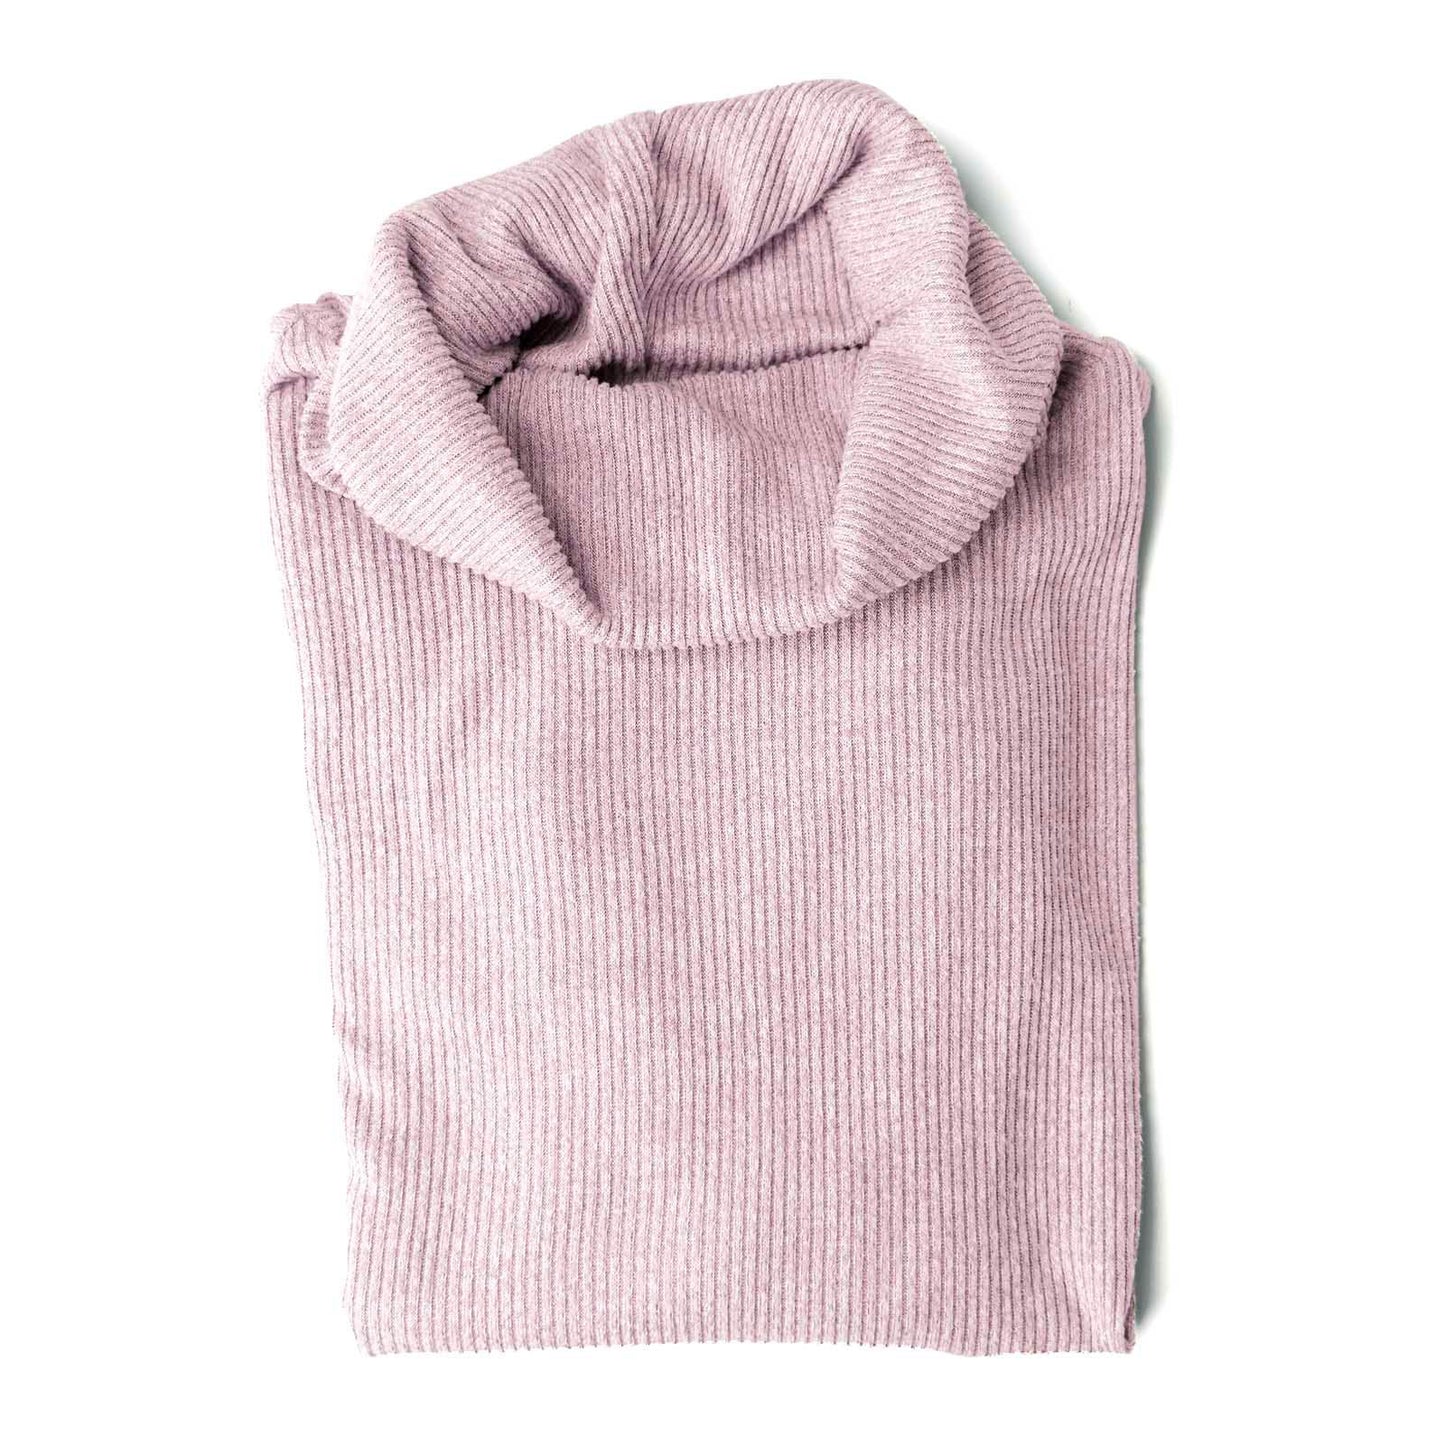 Hello Mello CuddleBlend Cowl Neck Top Indulge in Luxurious Comfort and Style!